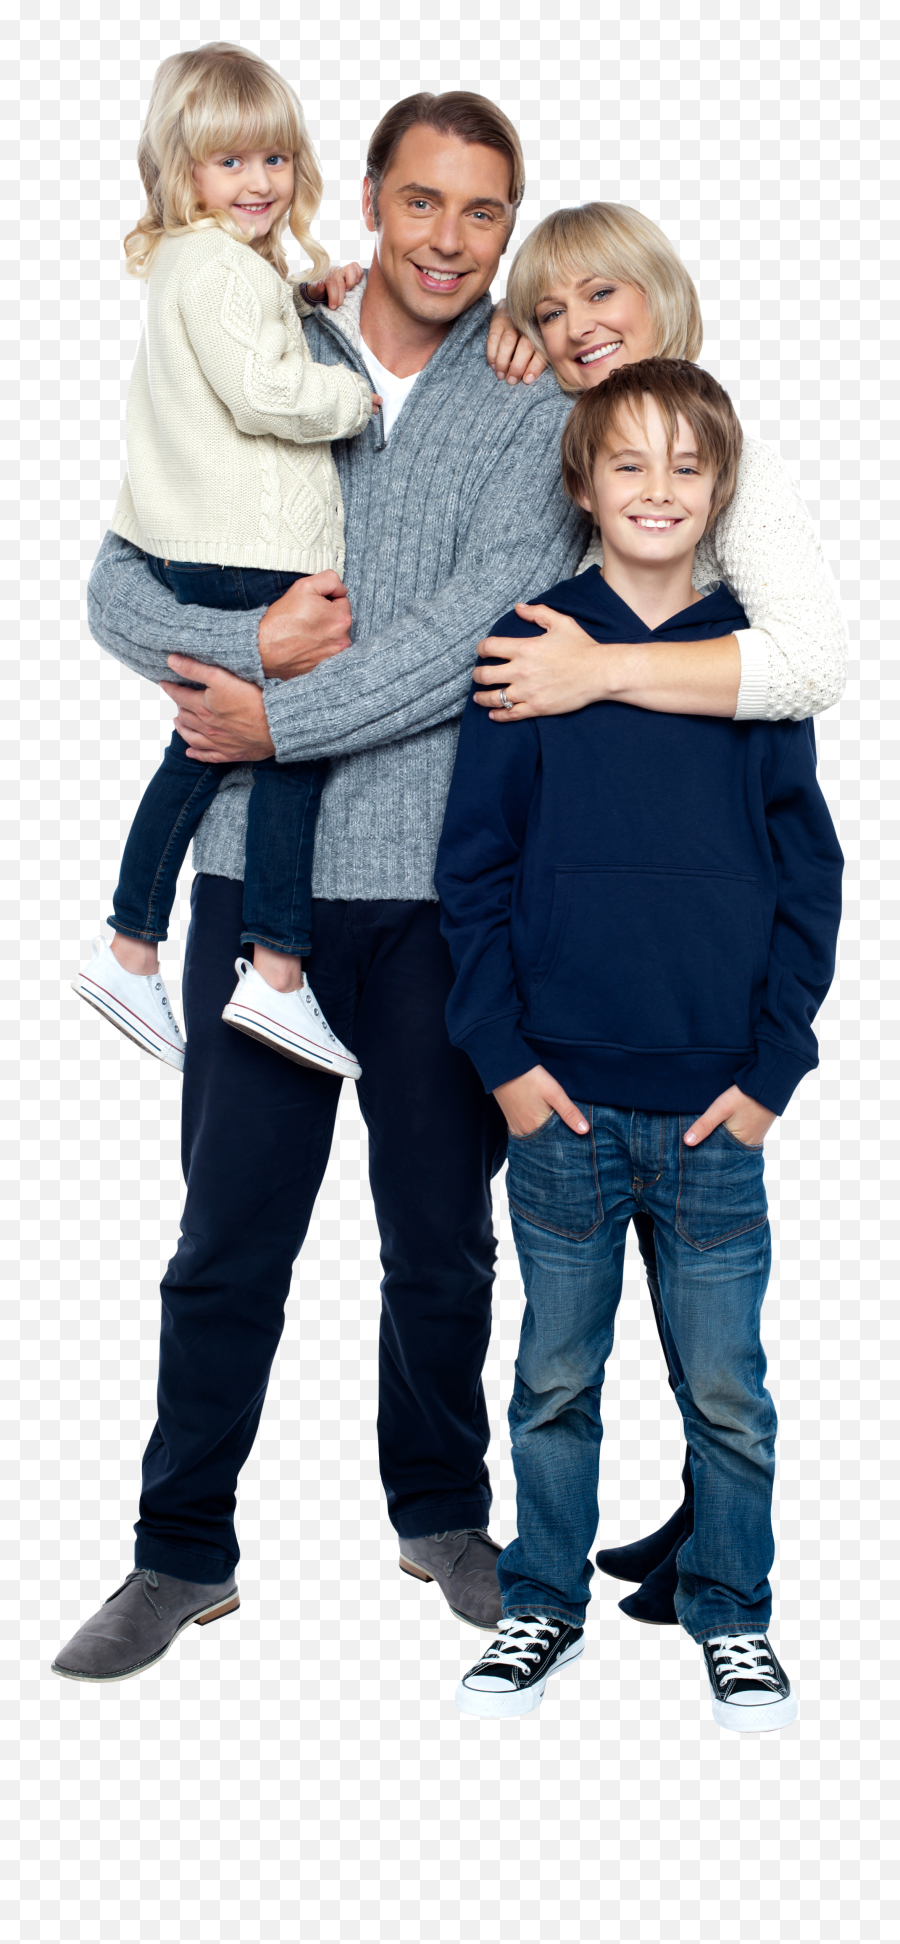 Png Images Transparent Background - Family Posing Photo Png,Family Transparent Background